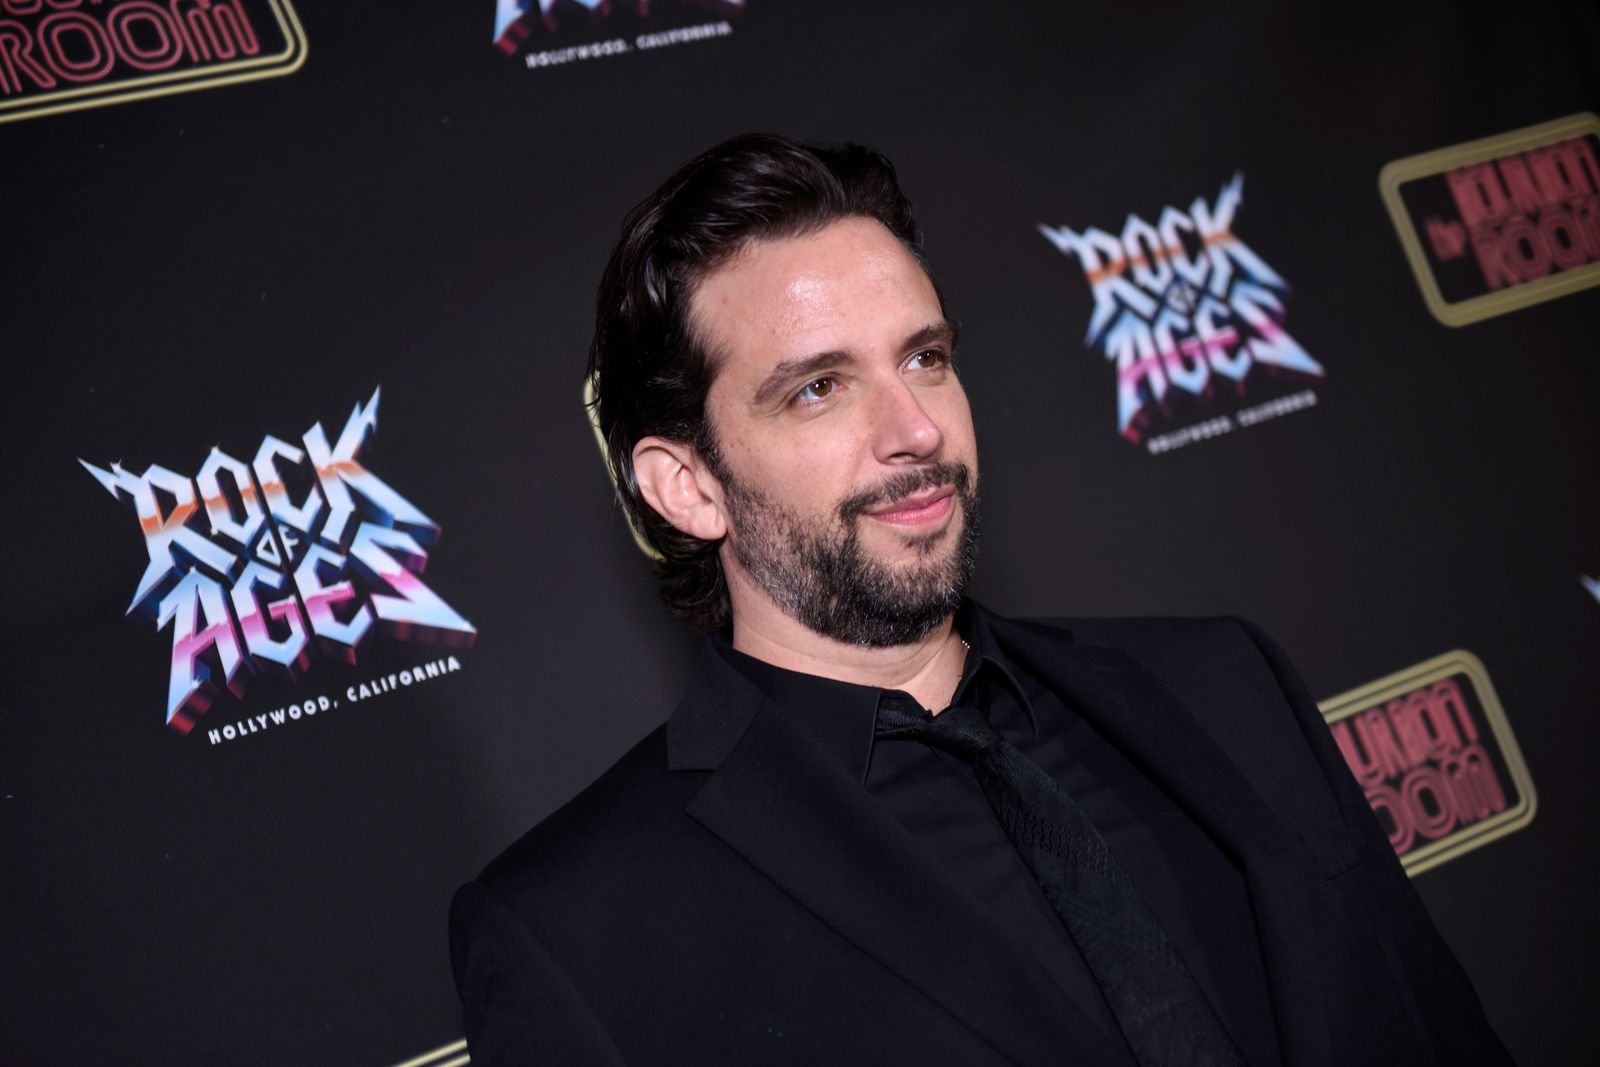 Nick Cordero at the opening night of "Rock Of Ages" at The Bourbon Room on January 15, 2020, in Hollywood, California | Photo: Vivien Killilea/Getty Images